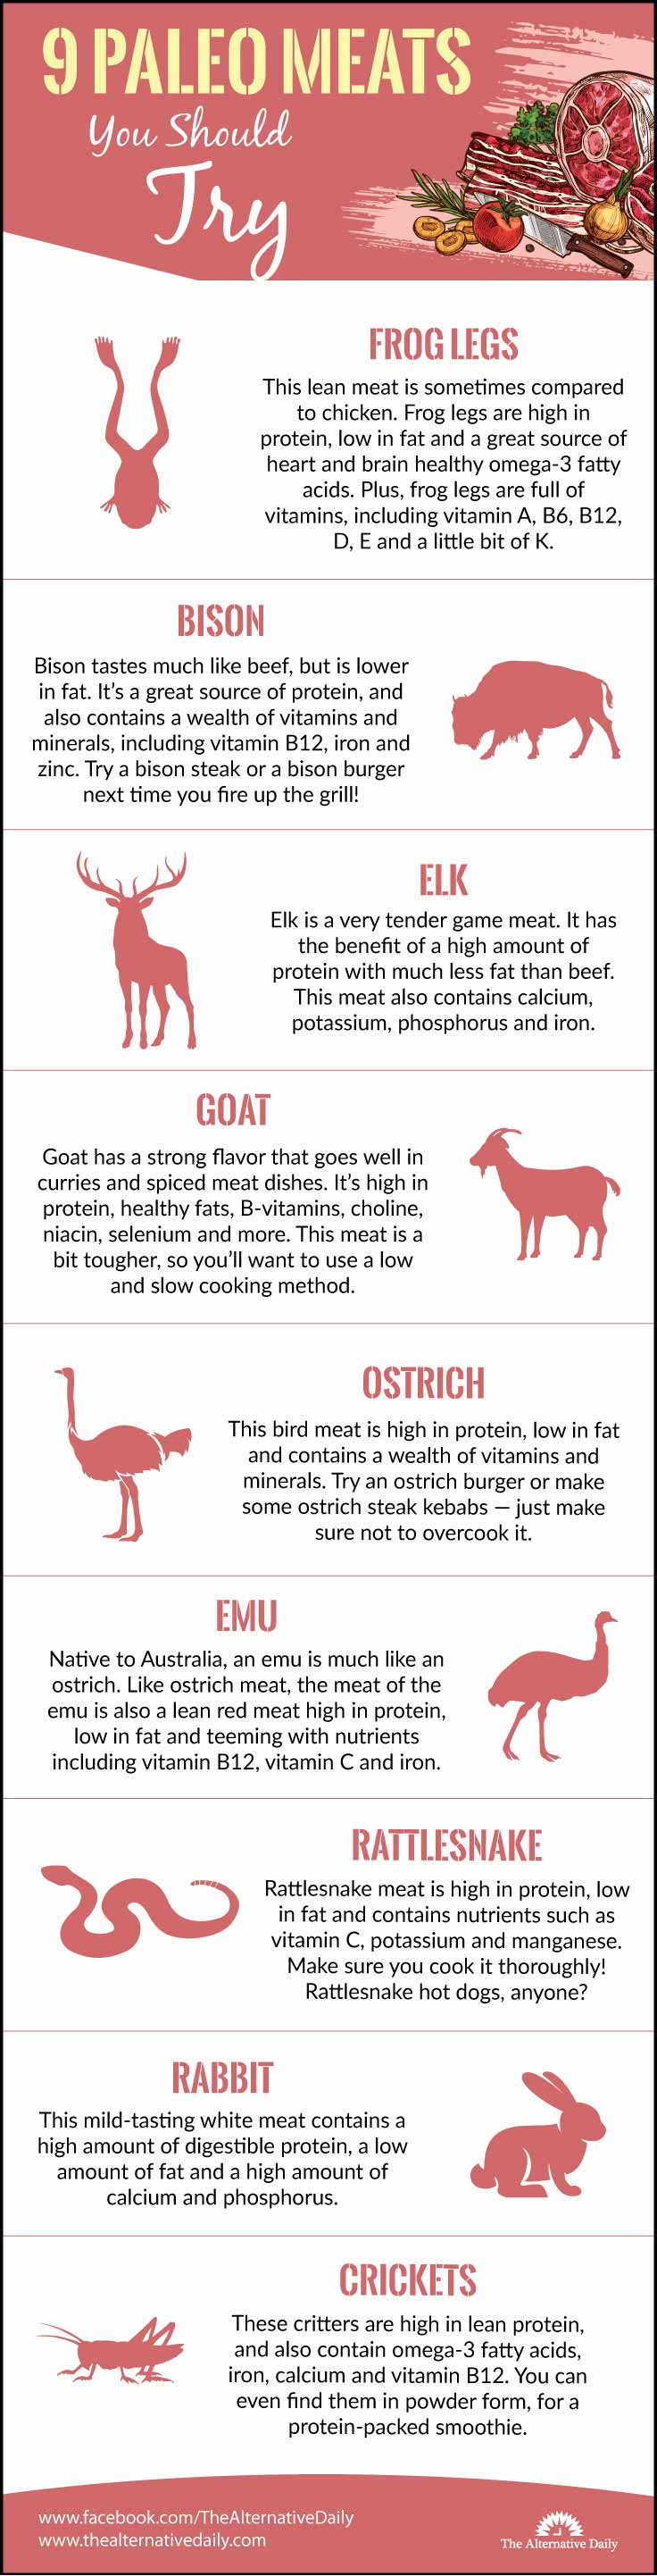 paleo-meats-to-try